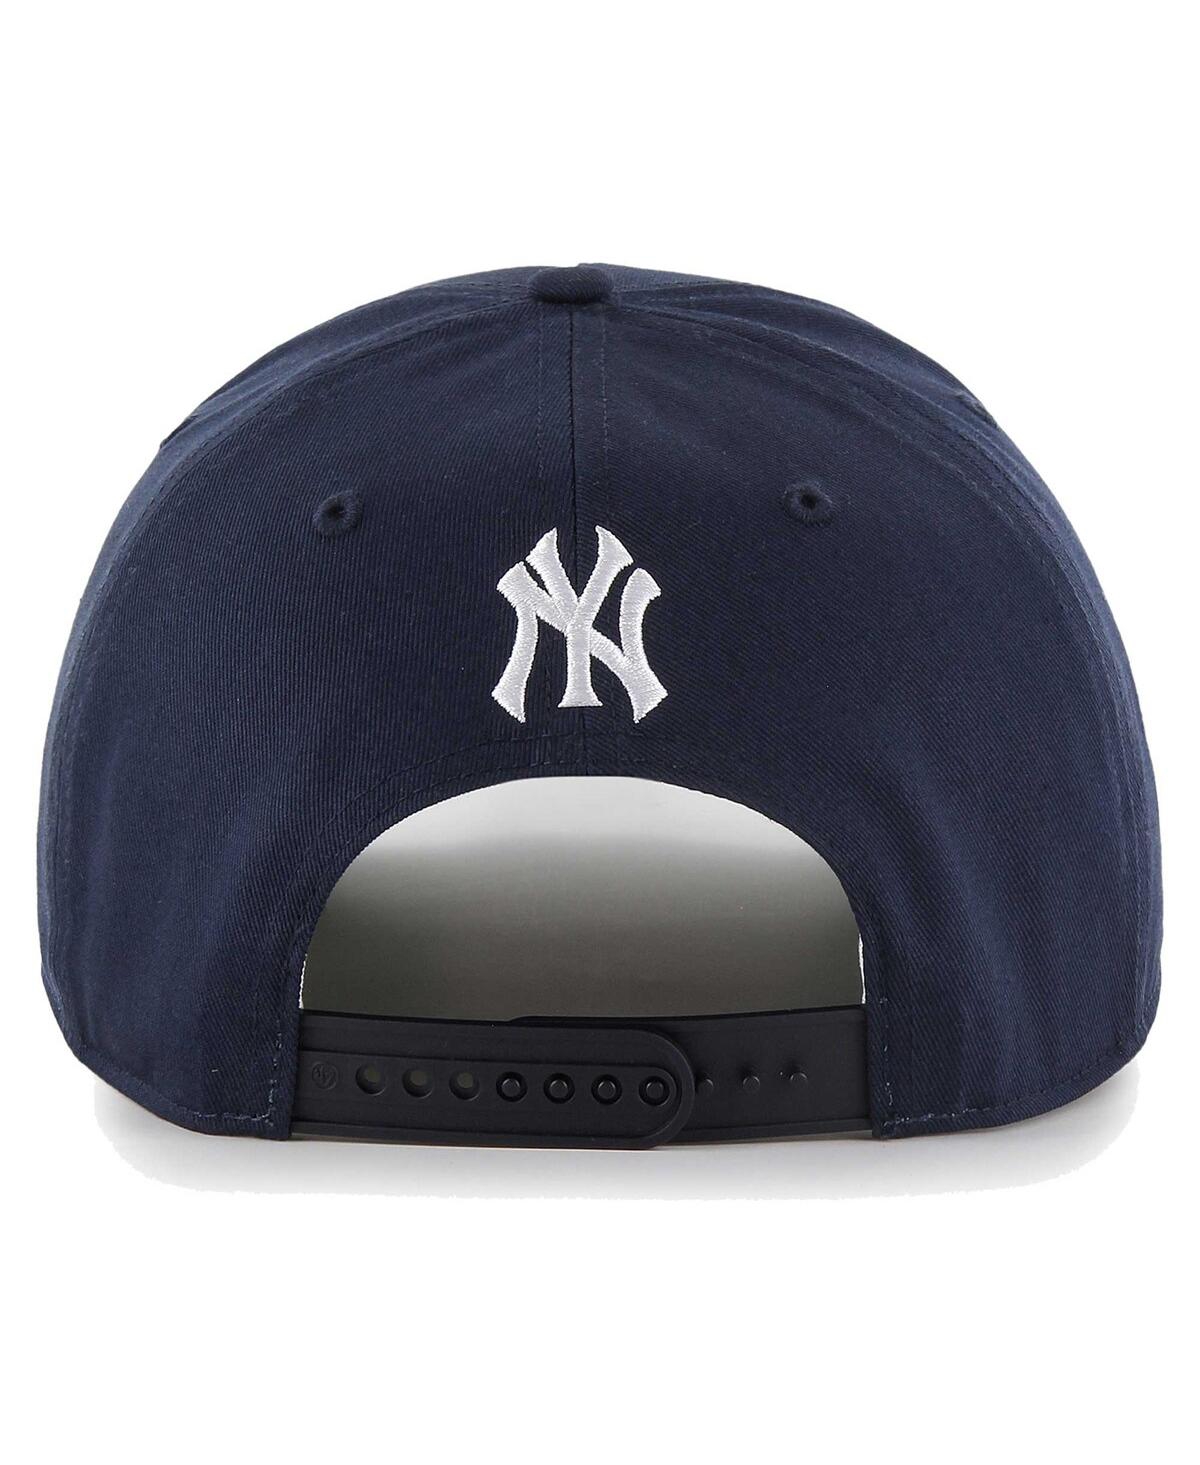 Shop 47 Brand Men's Navy New York Yankees Wax Pack Collection Premier Hitch Adjustable Hat